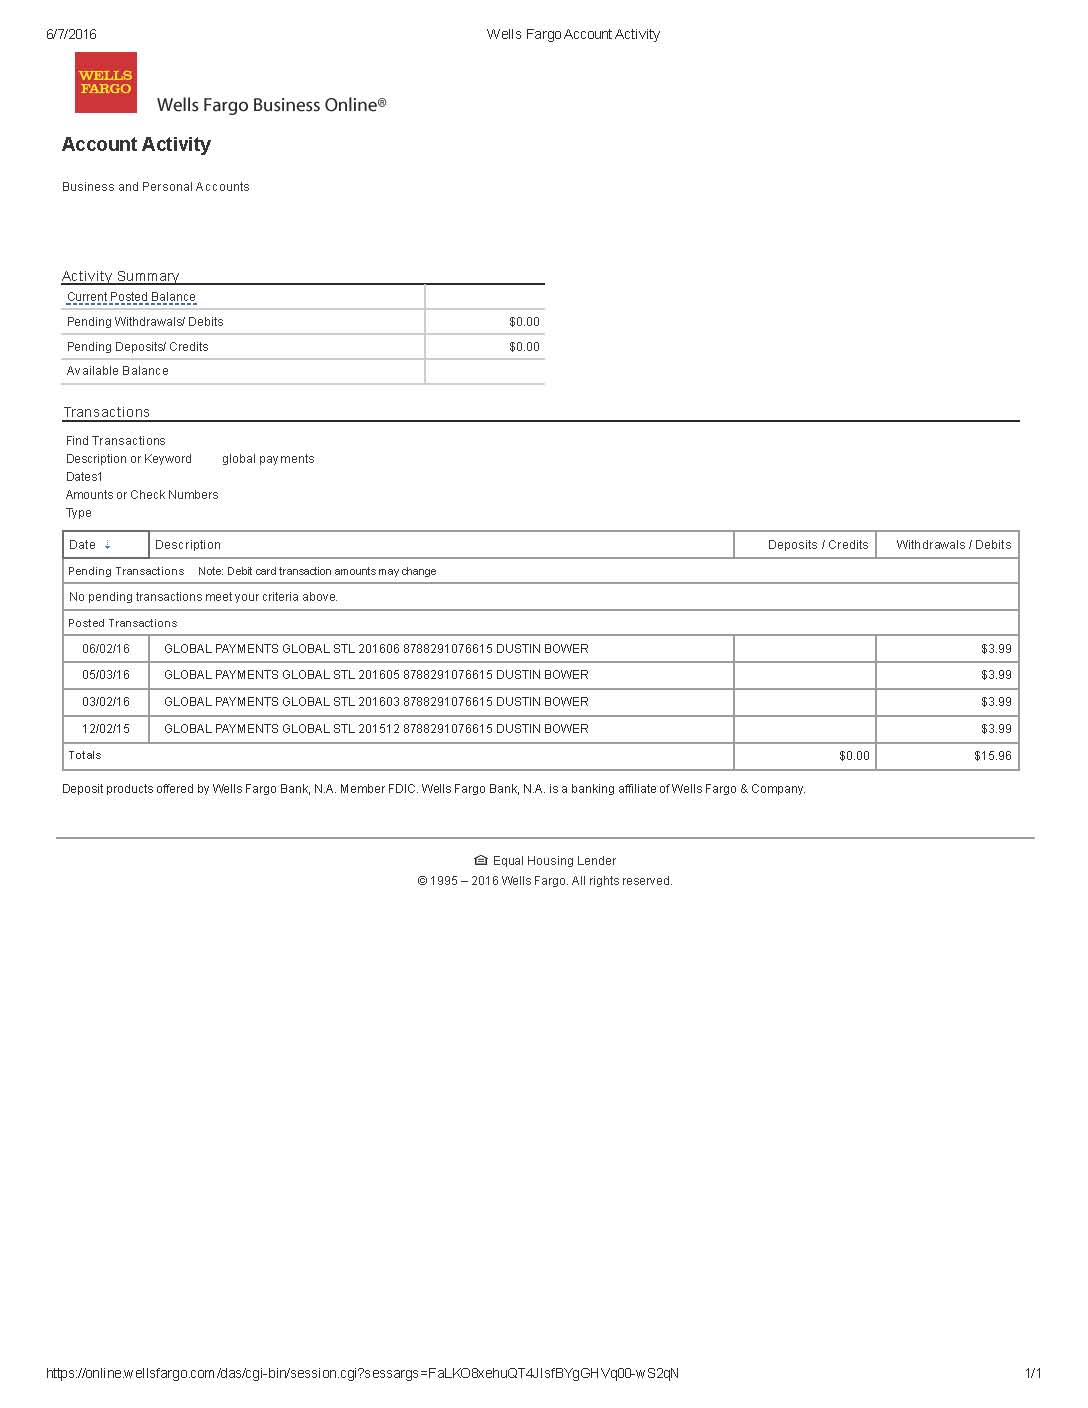 Copy of Bank Statement showing fees